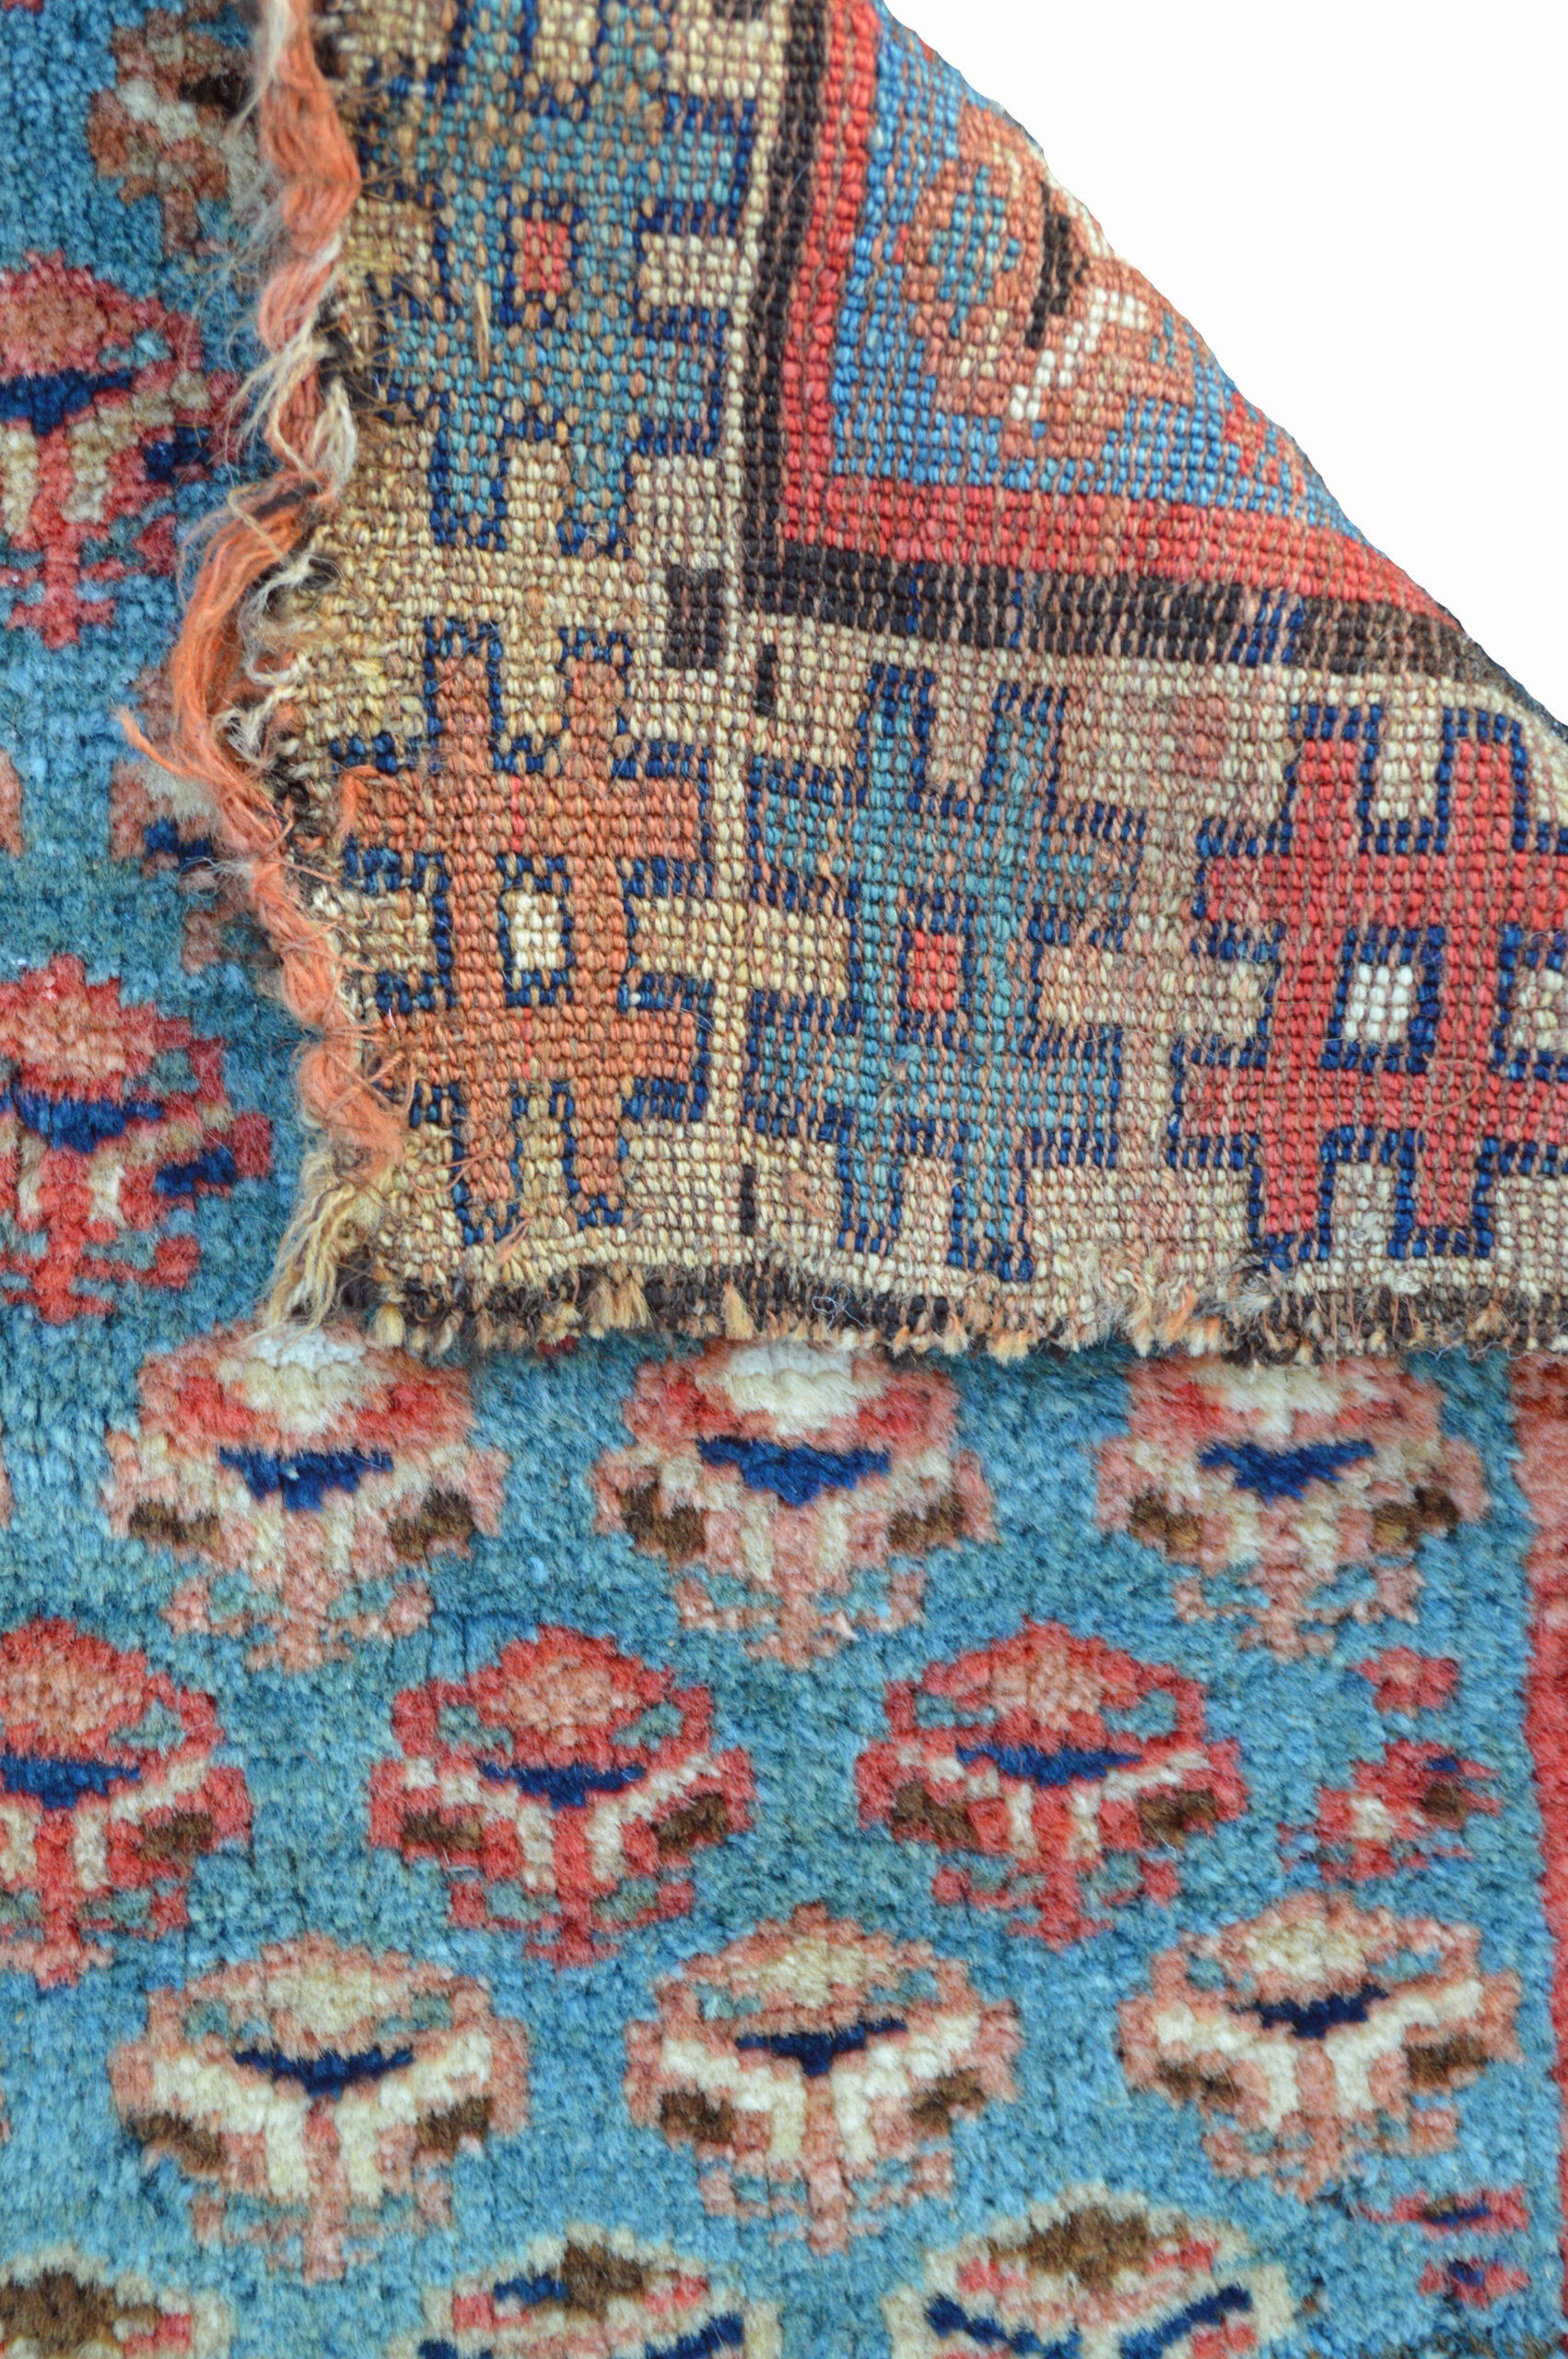 Weave detail of an antique Kurdish bag face from northwest Persia